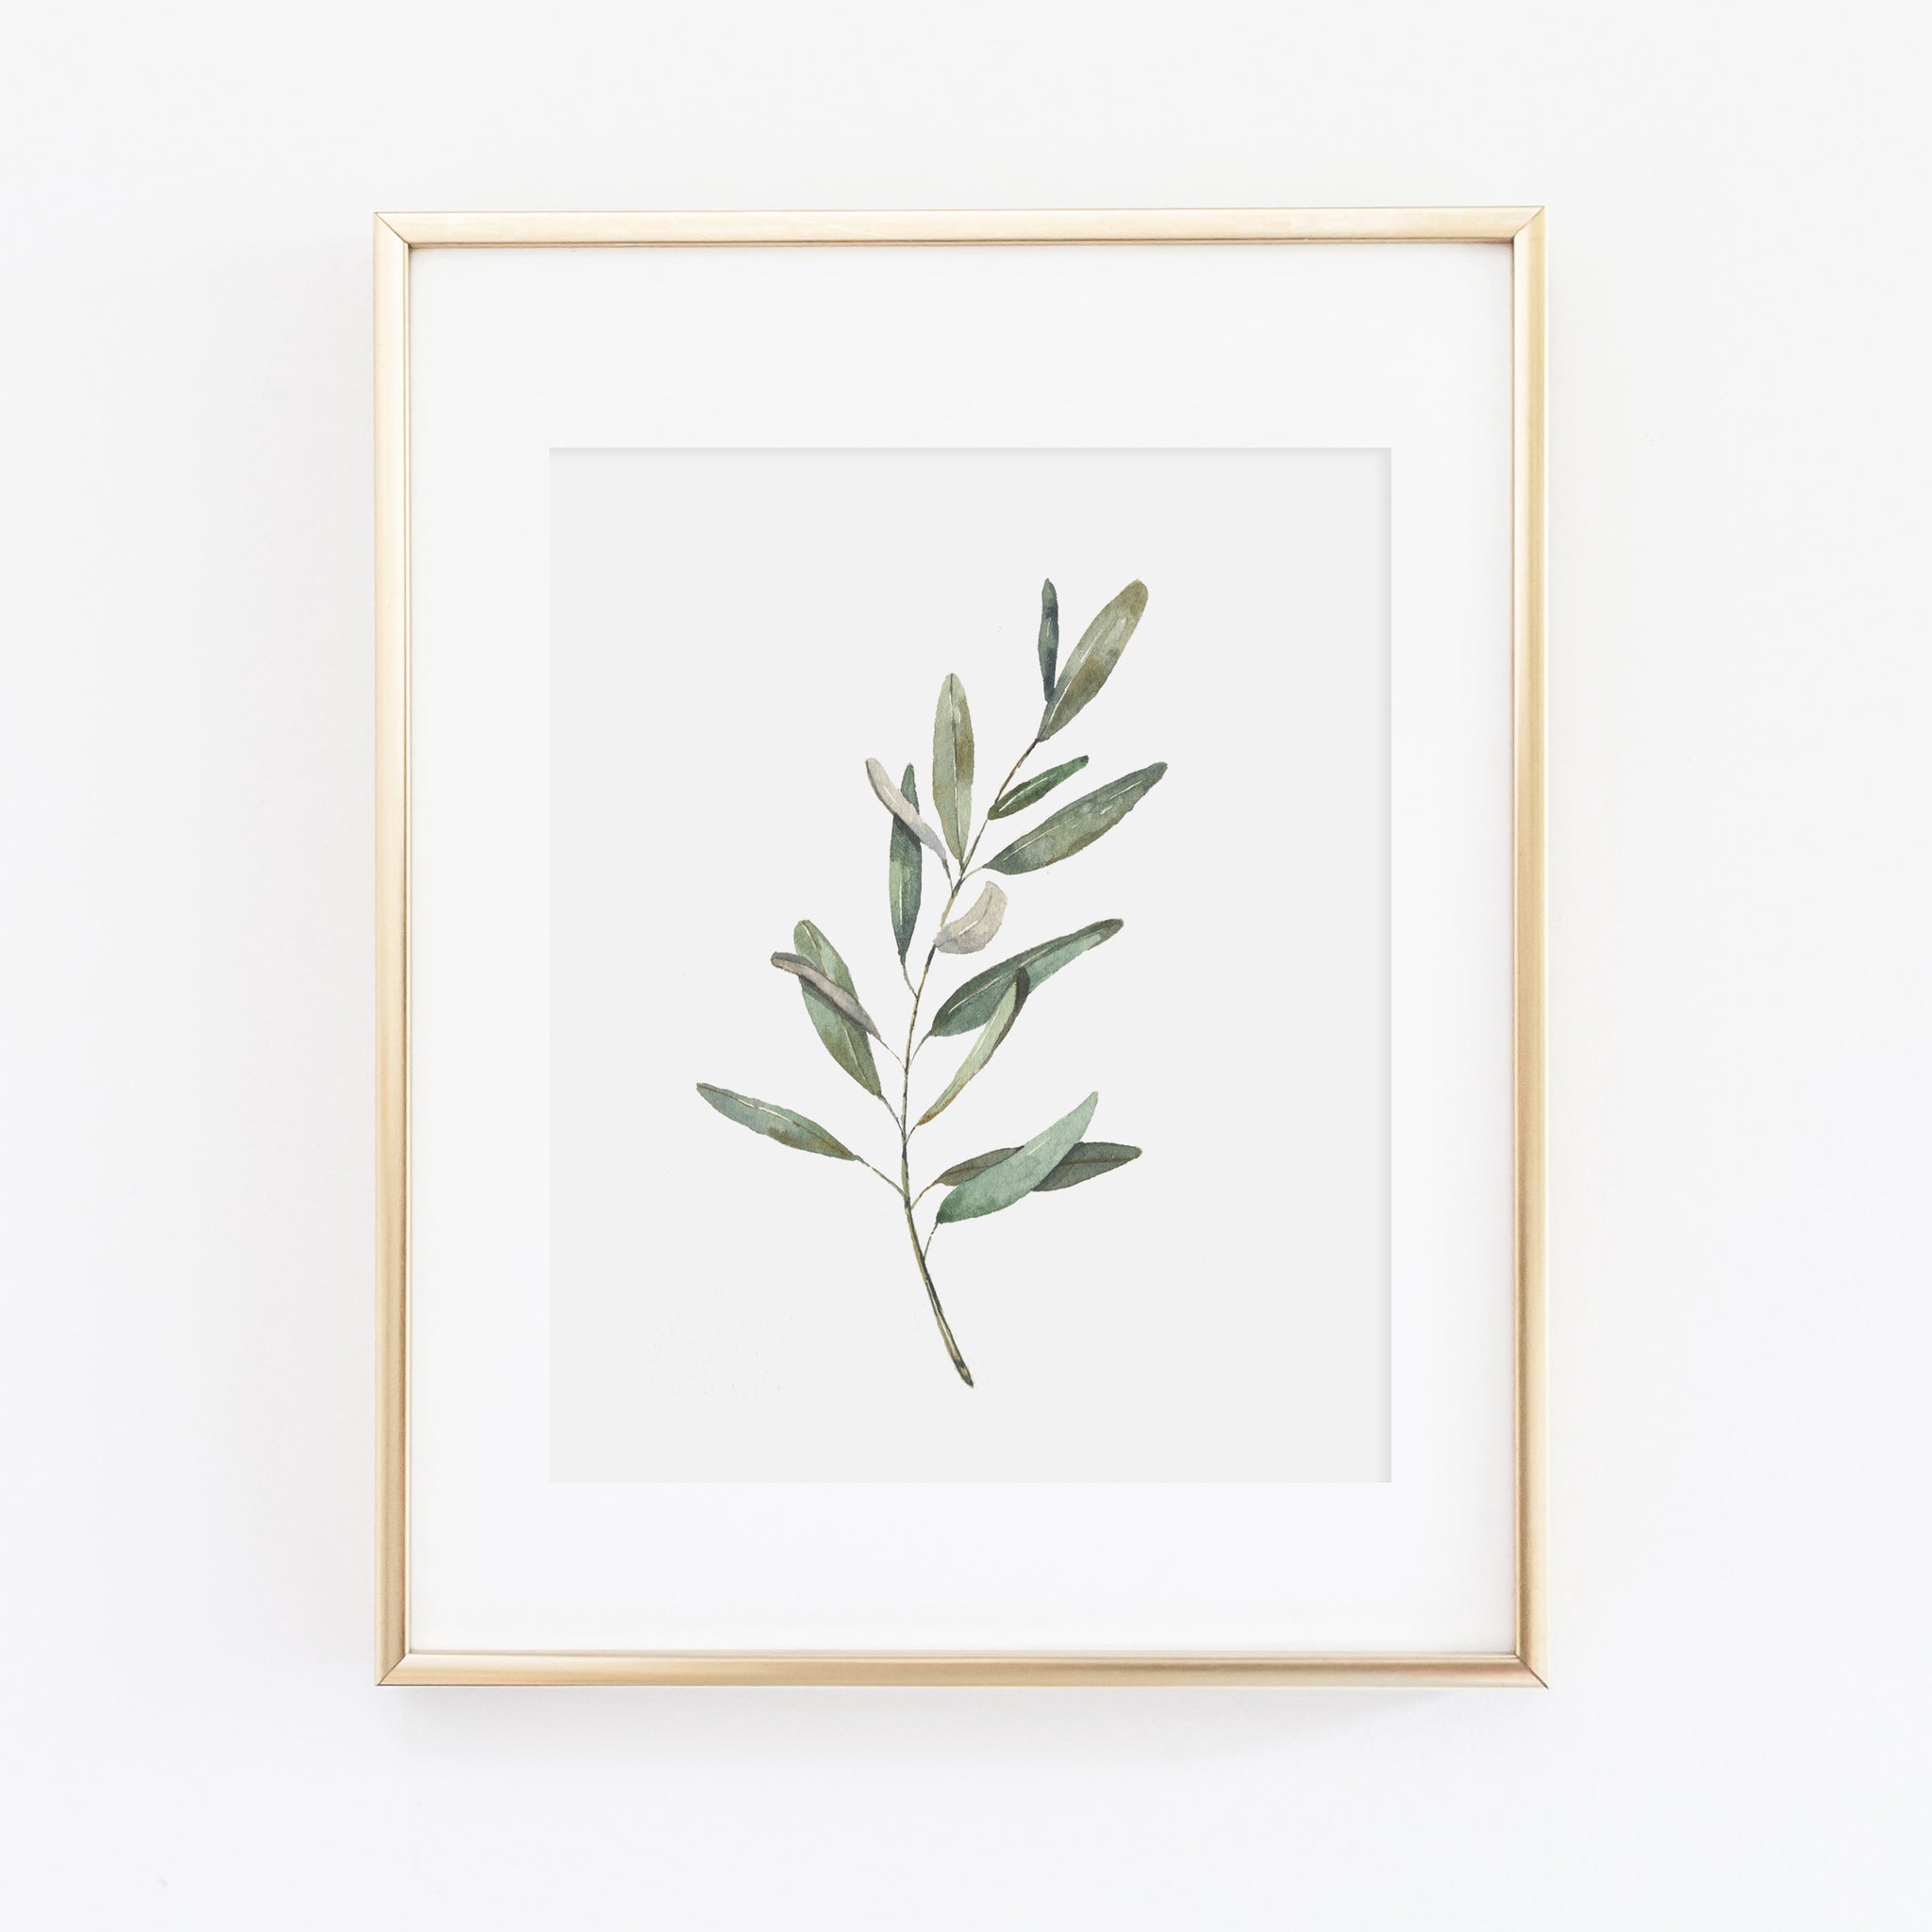 olive branches, an art print by jenny pokryvailo - INPRNT